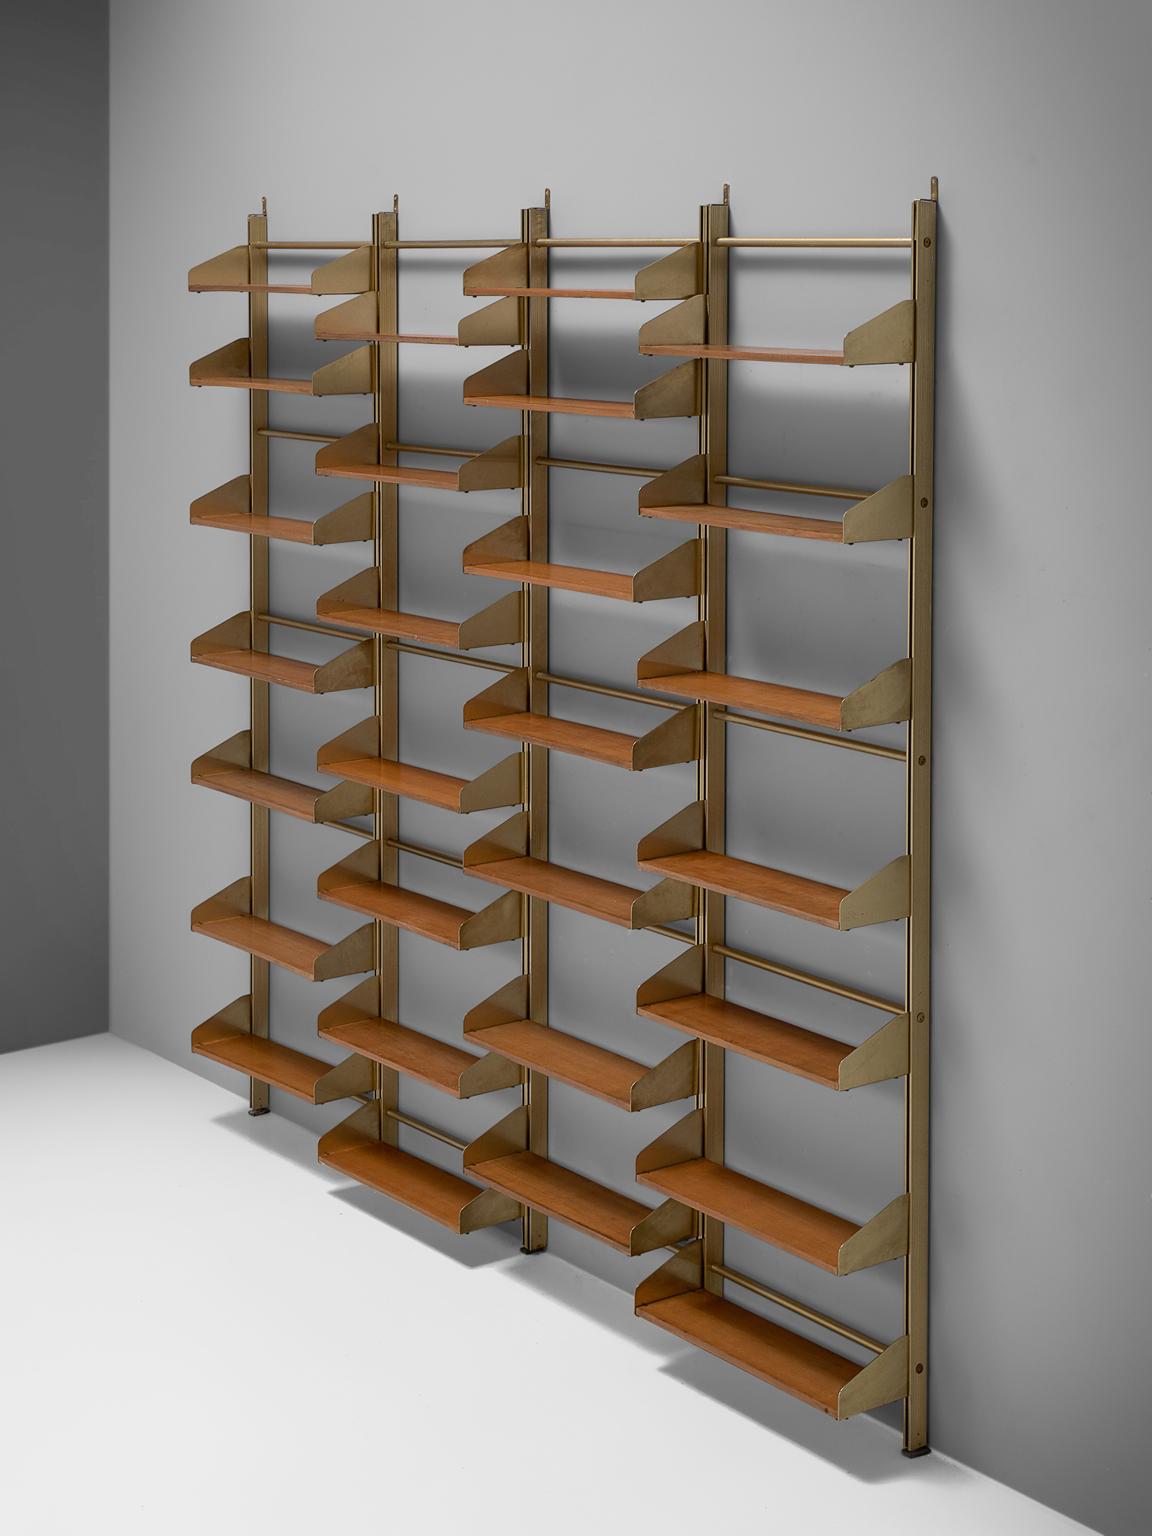 FEAL, Wall unit, teak brass and brassed aluminum, Italy, 1950s. 

This eloquent wall unit from Italy is made with a brassed aluminum frame and connective joints and plenty of teak shelves. The combination of the brass and teak is both modest and